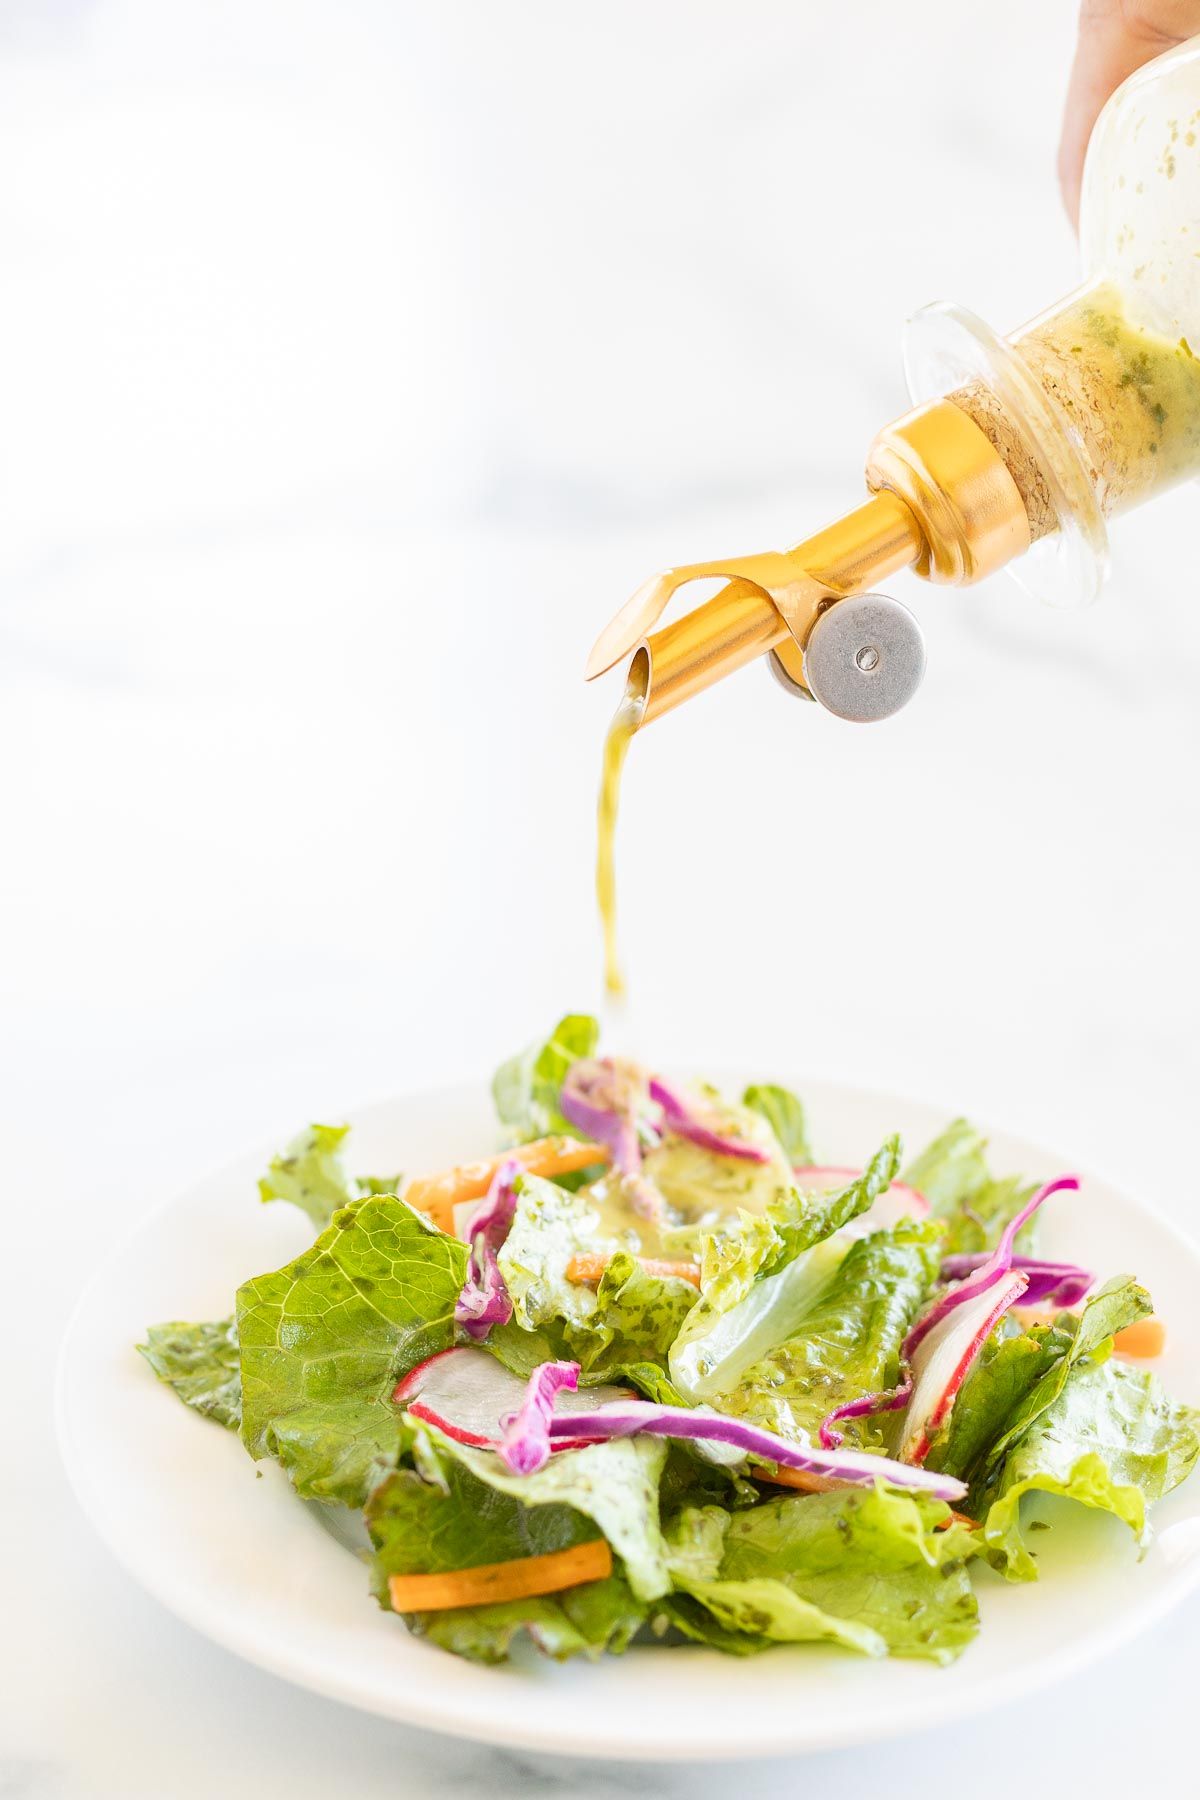 A glass bottle of cilantro lime dressing being poured over a green salad on a white plate.